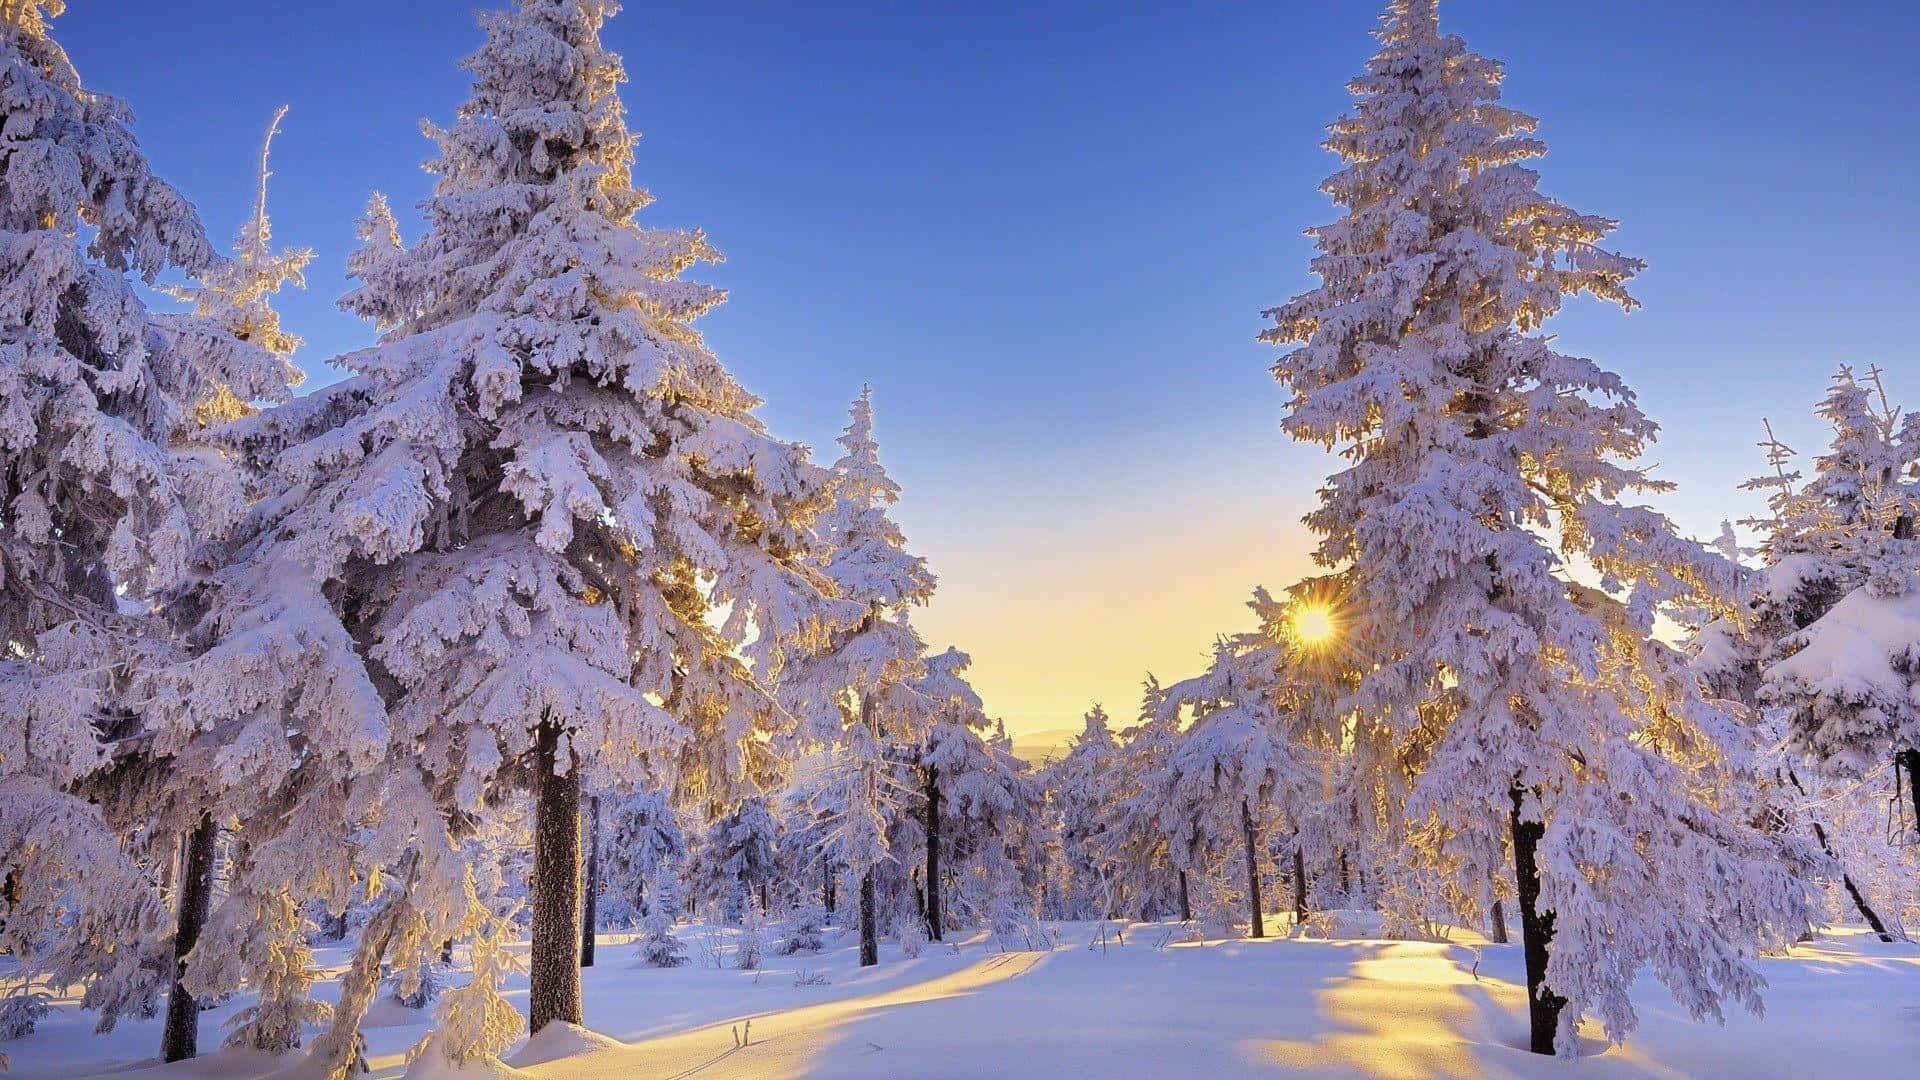 HD Winter Background Snow Covered Fir Trees With Sunset Sky